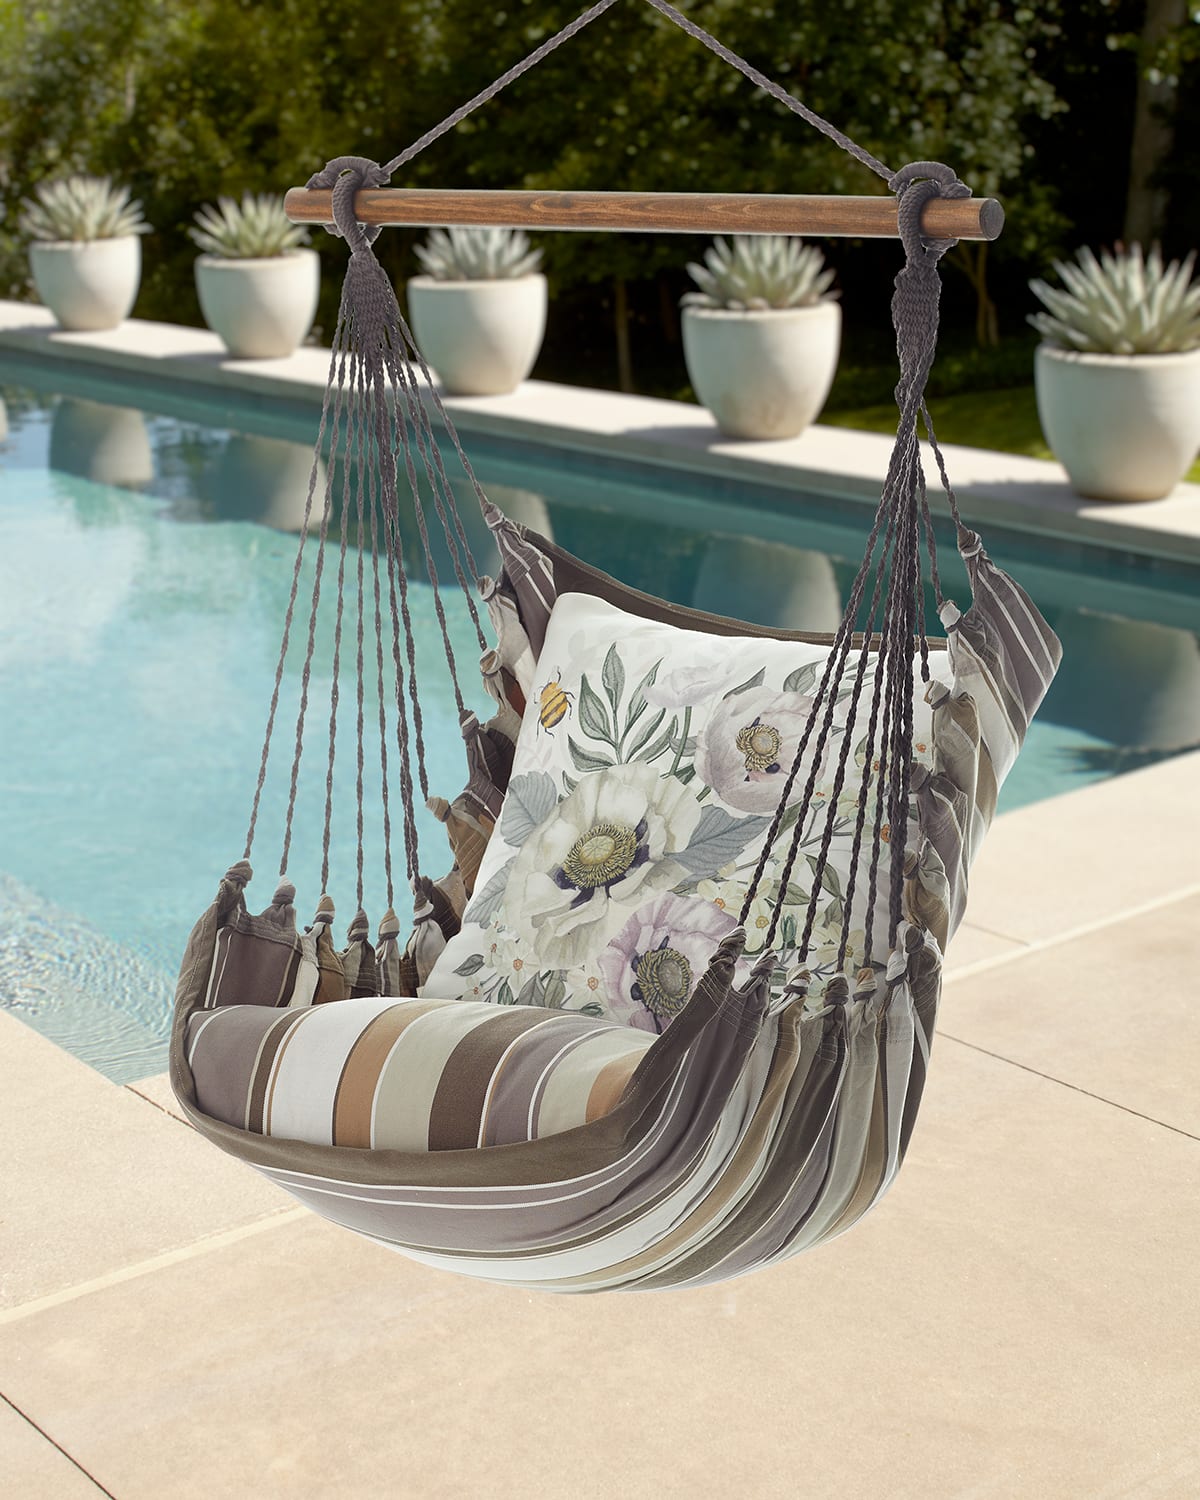 Boho Blooms & Bees Striped Swing